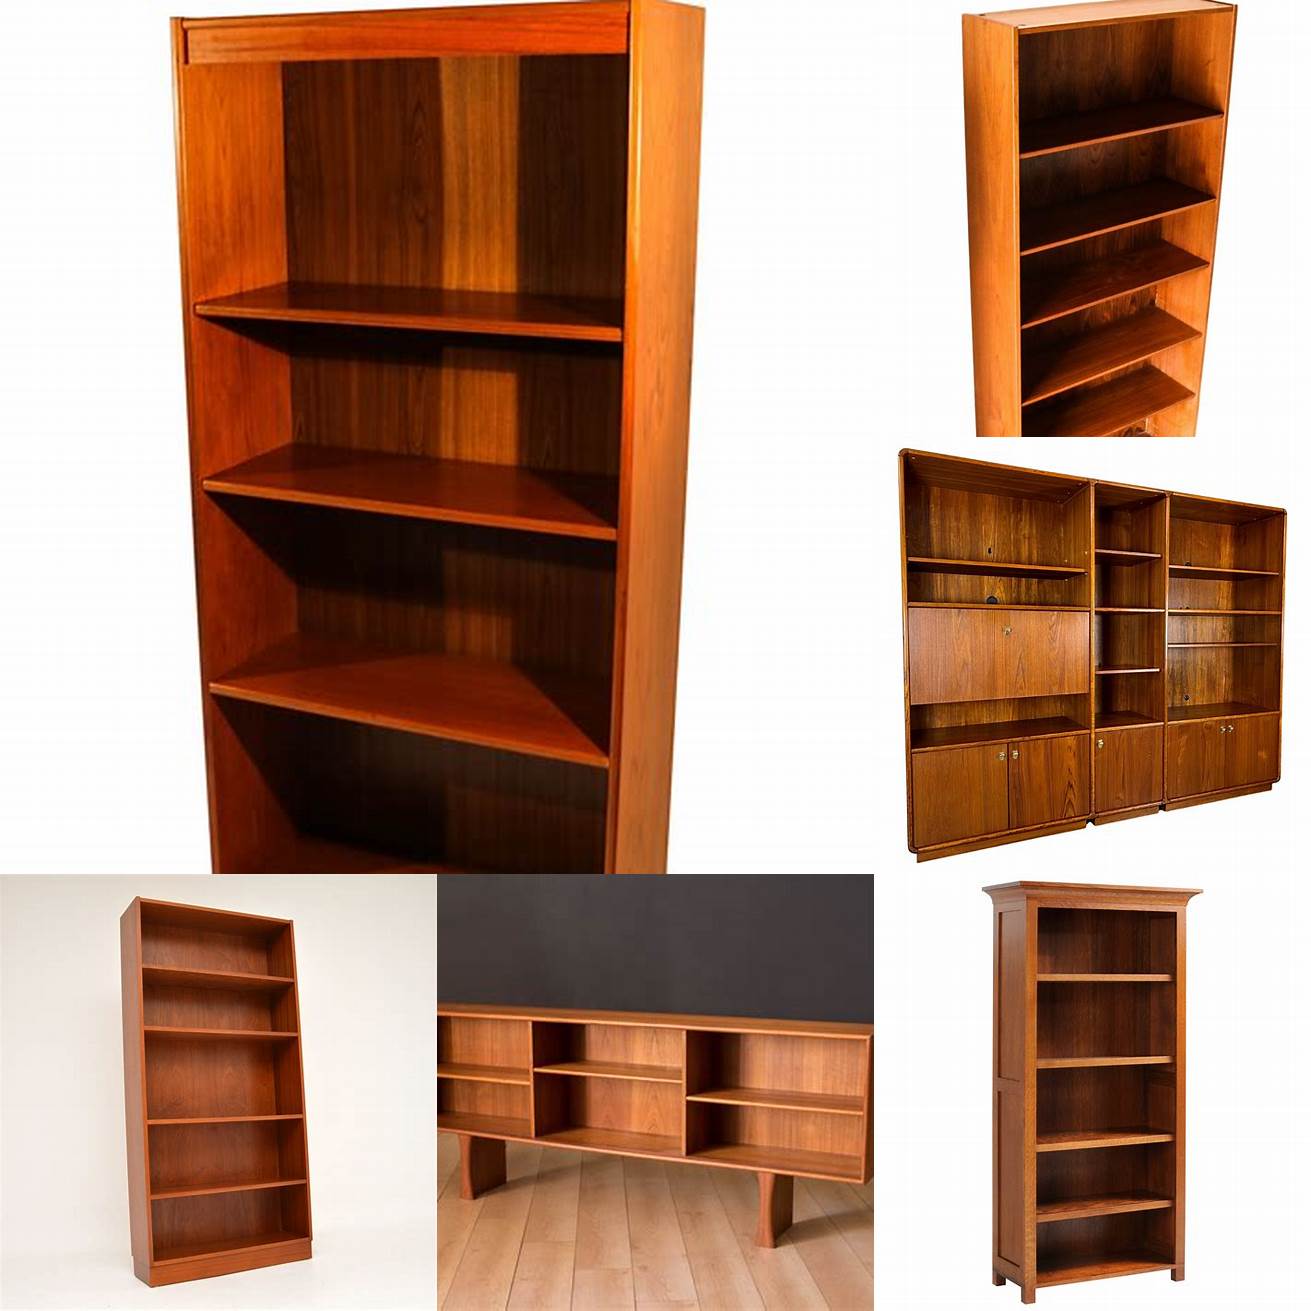 A teak bookcase with wood inserts